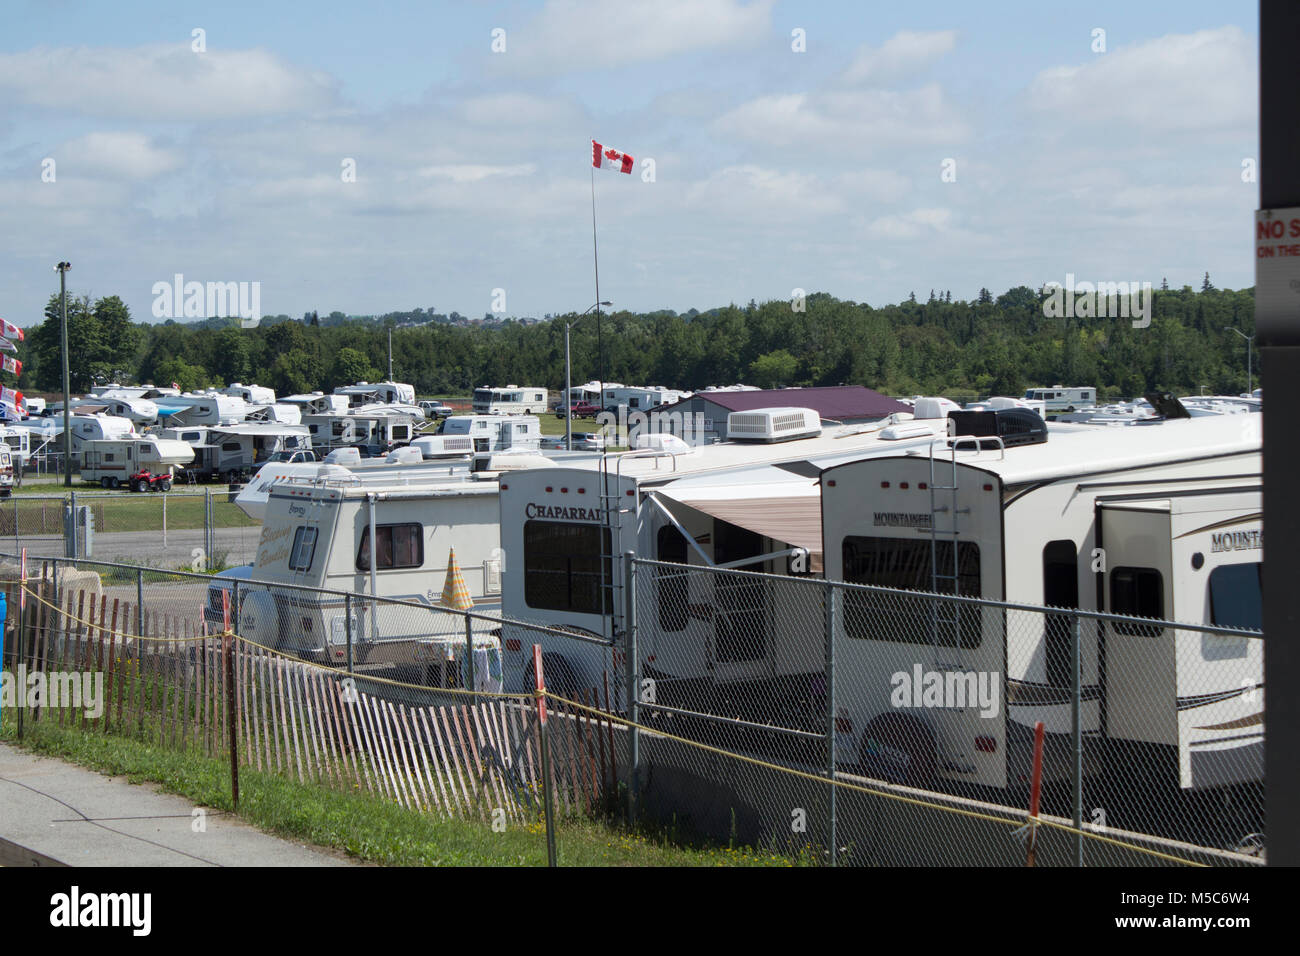 Camper trailers parked on fairgrounds in Lindsday Ontario Canada Stock Photo